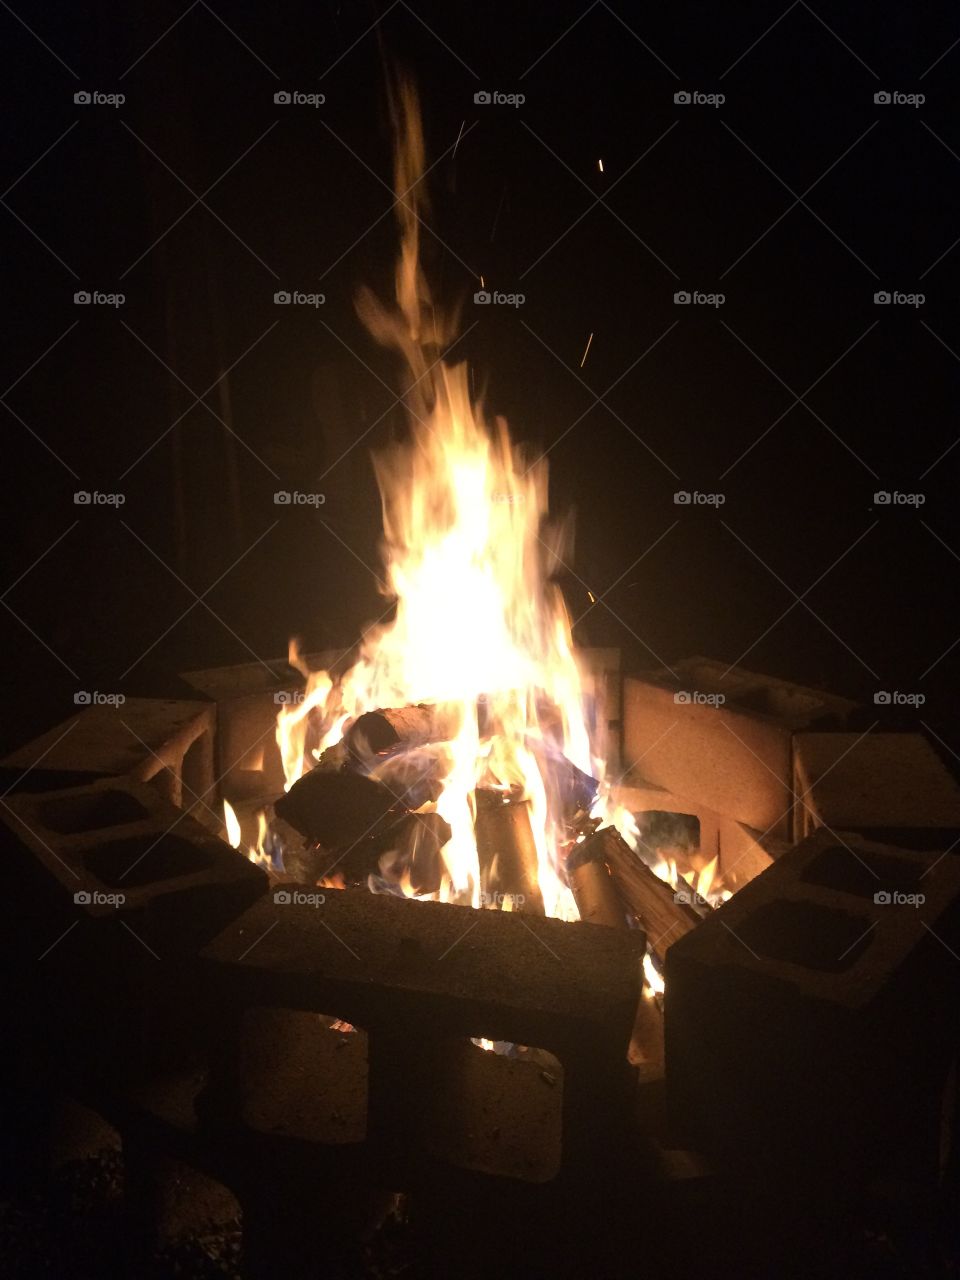 Relaxing by the fire 